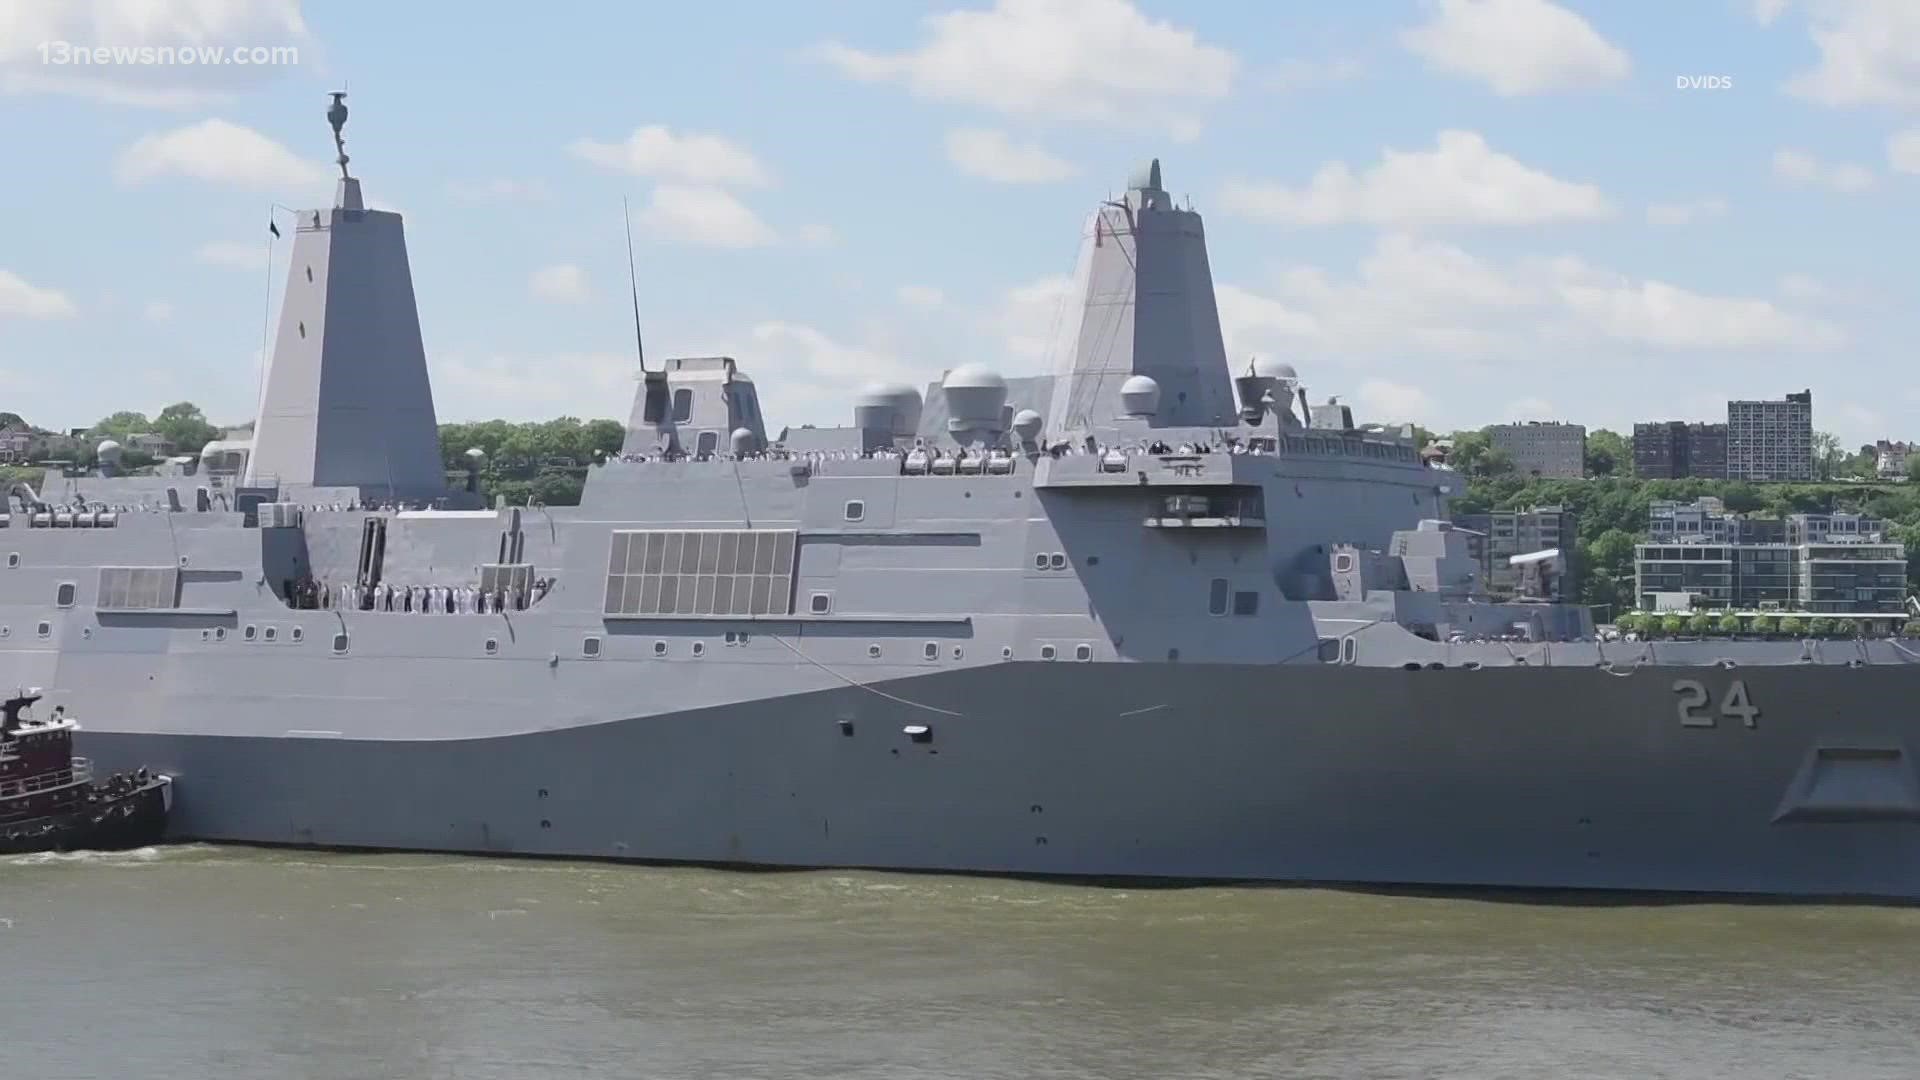 The Department of Defense announced a big contract to repair the Navy amphibious transport dock USS Arlington has been awarded to General Dynamics NASSCO-Norfolk.